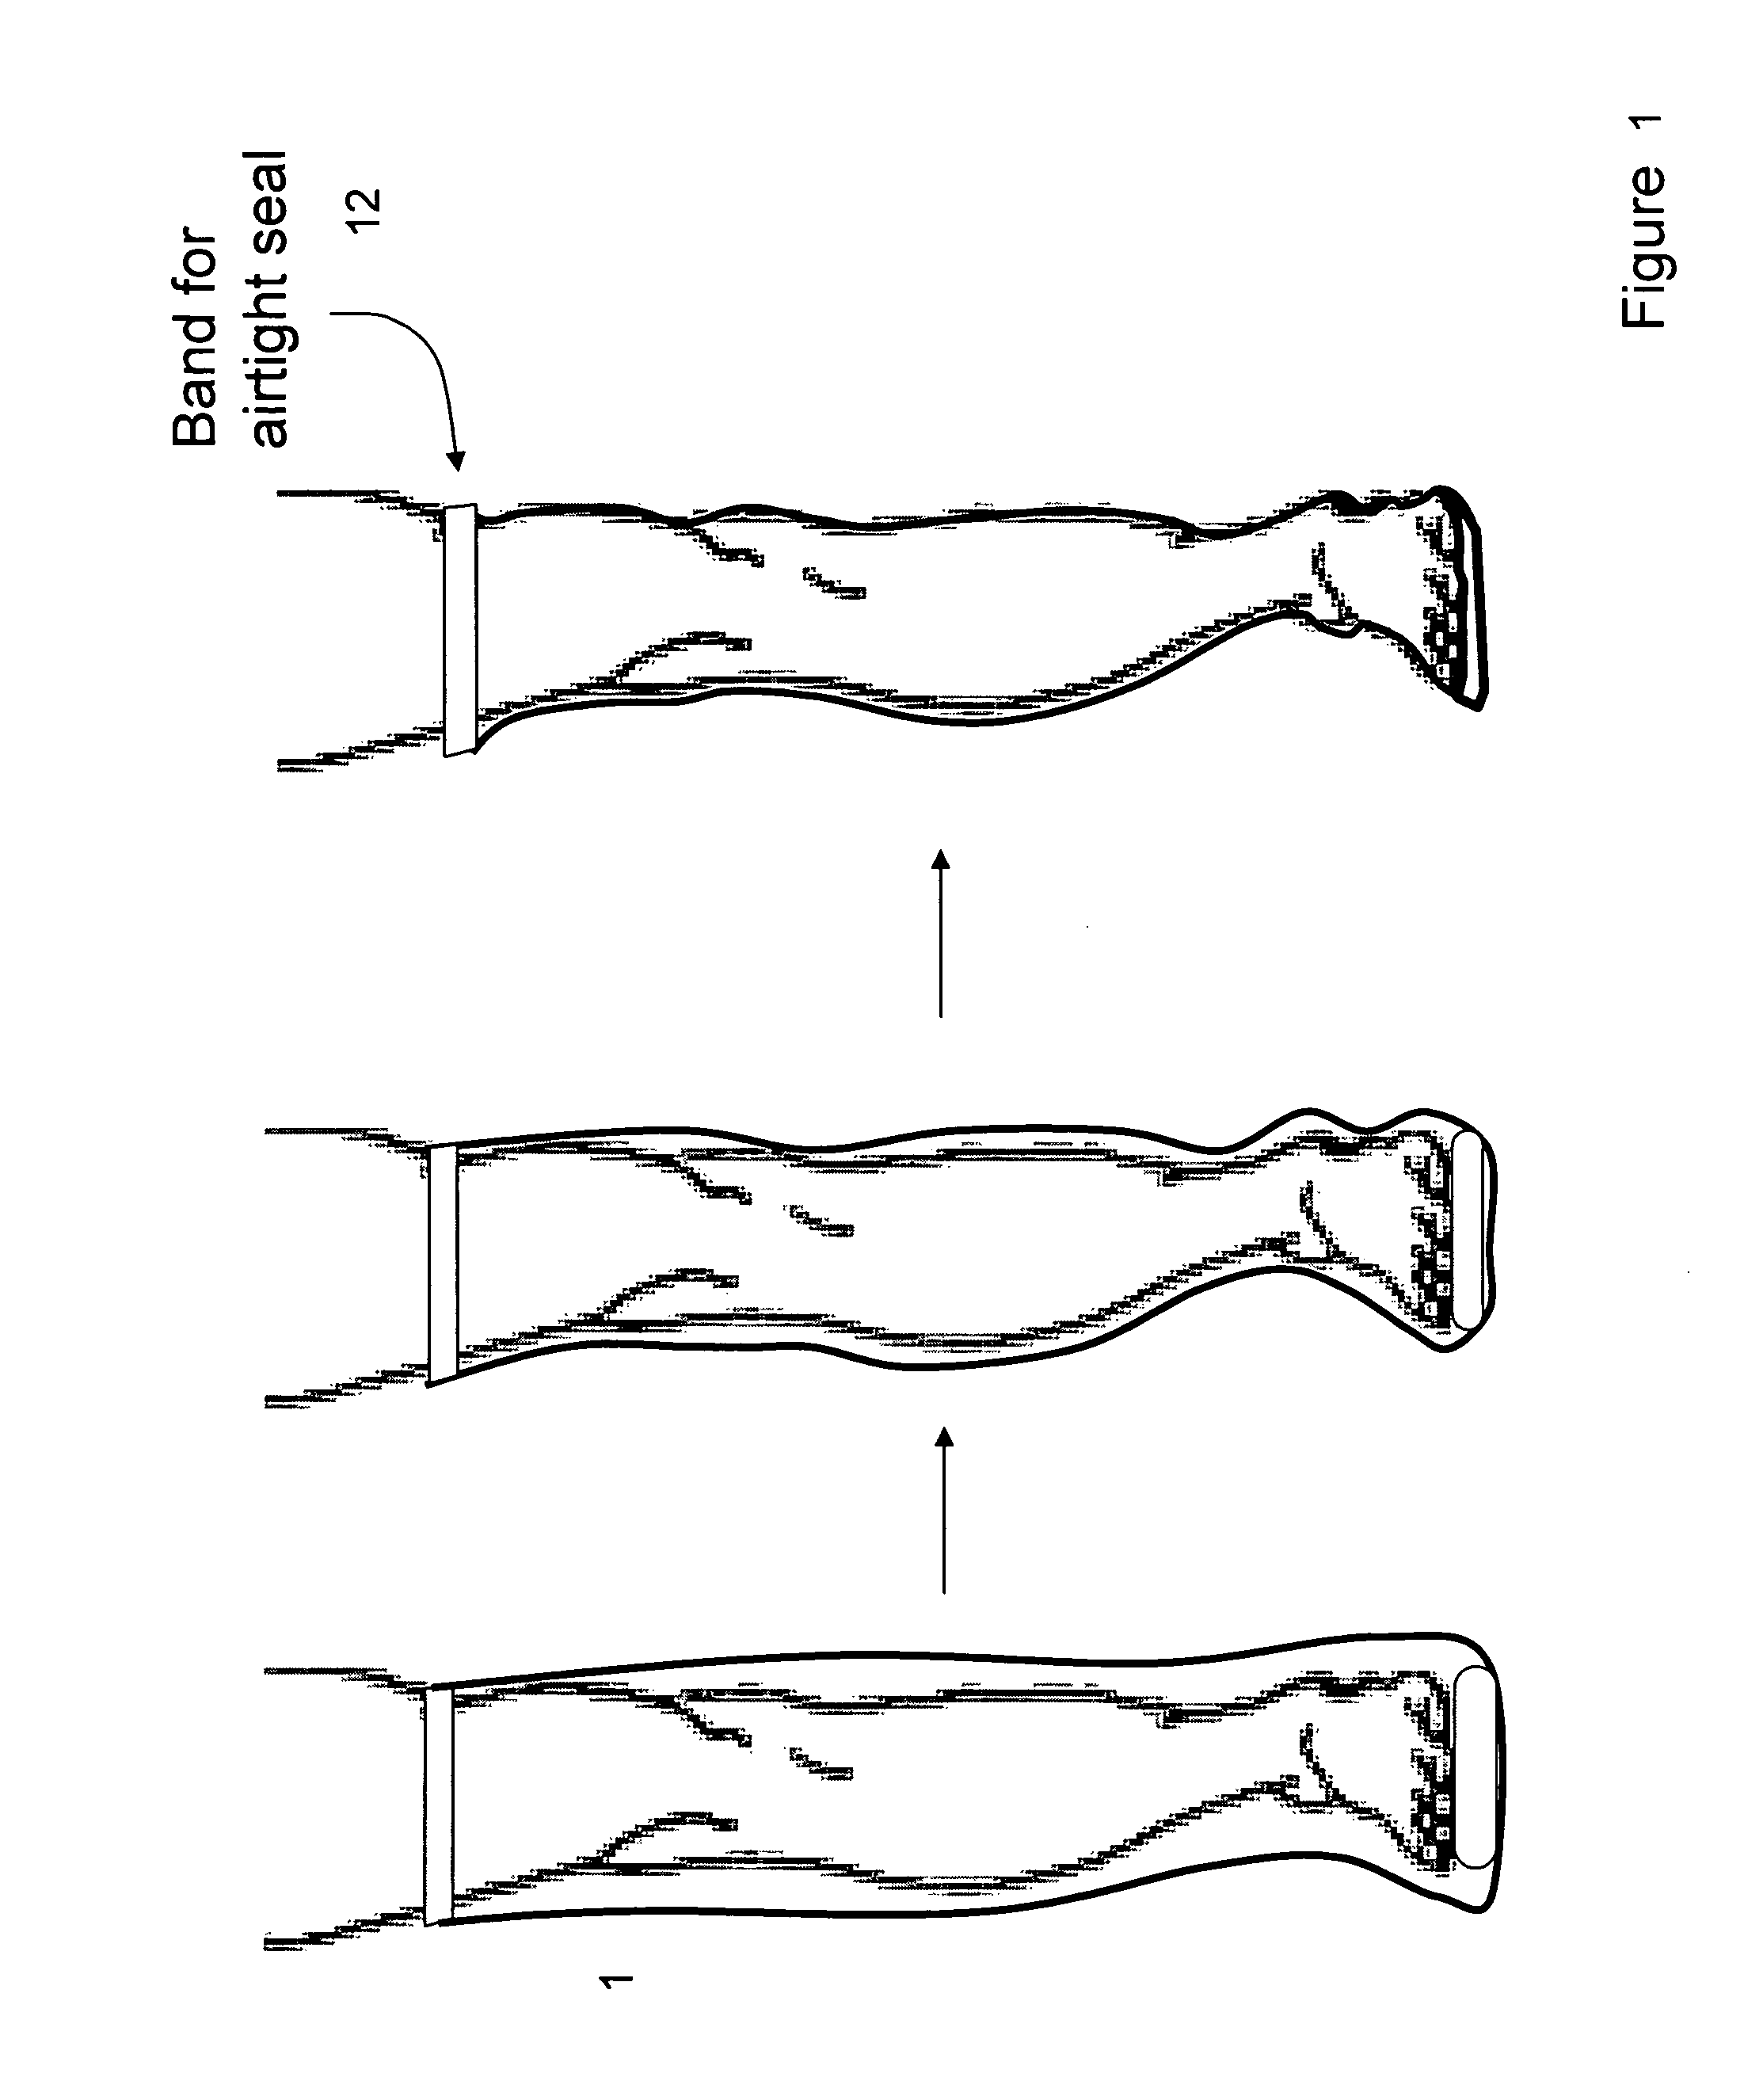 Method and apparatus for treating wound using negative pressure therapy